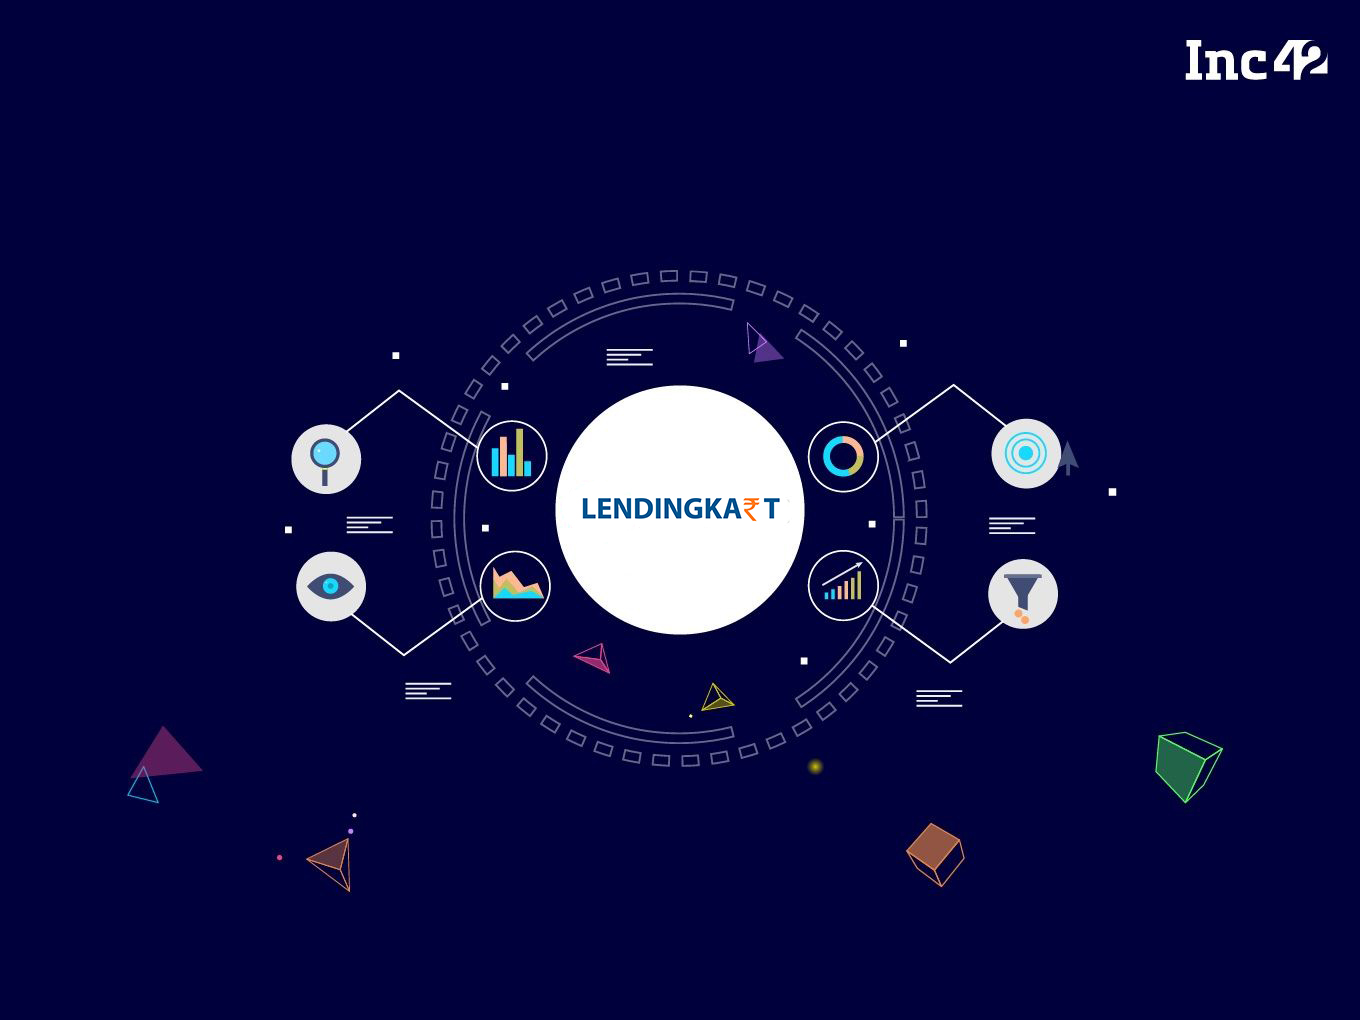 [What The Financials] Lendingkart Records Second Straight Profitable Year With INR 464 Cr FY20 Revenue